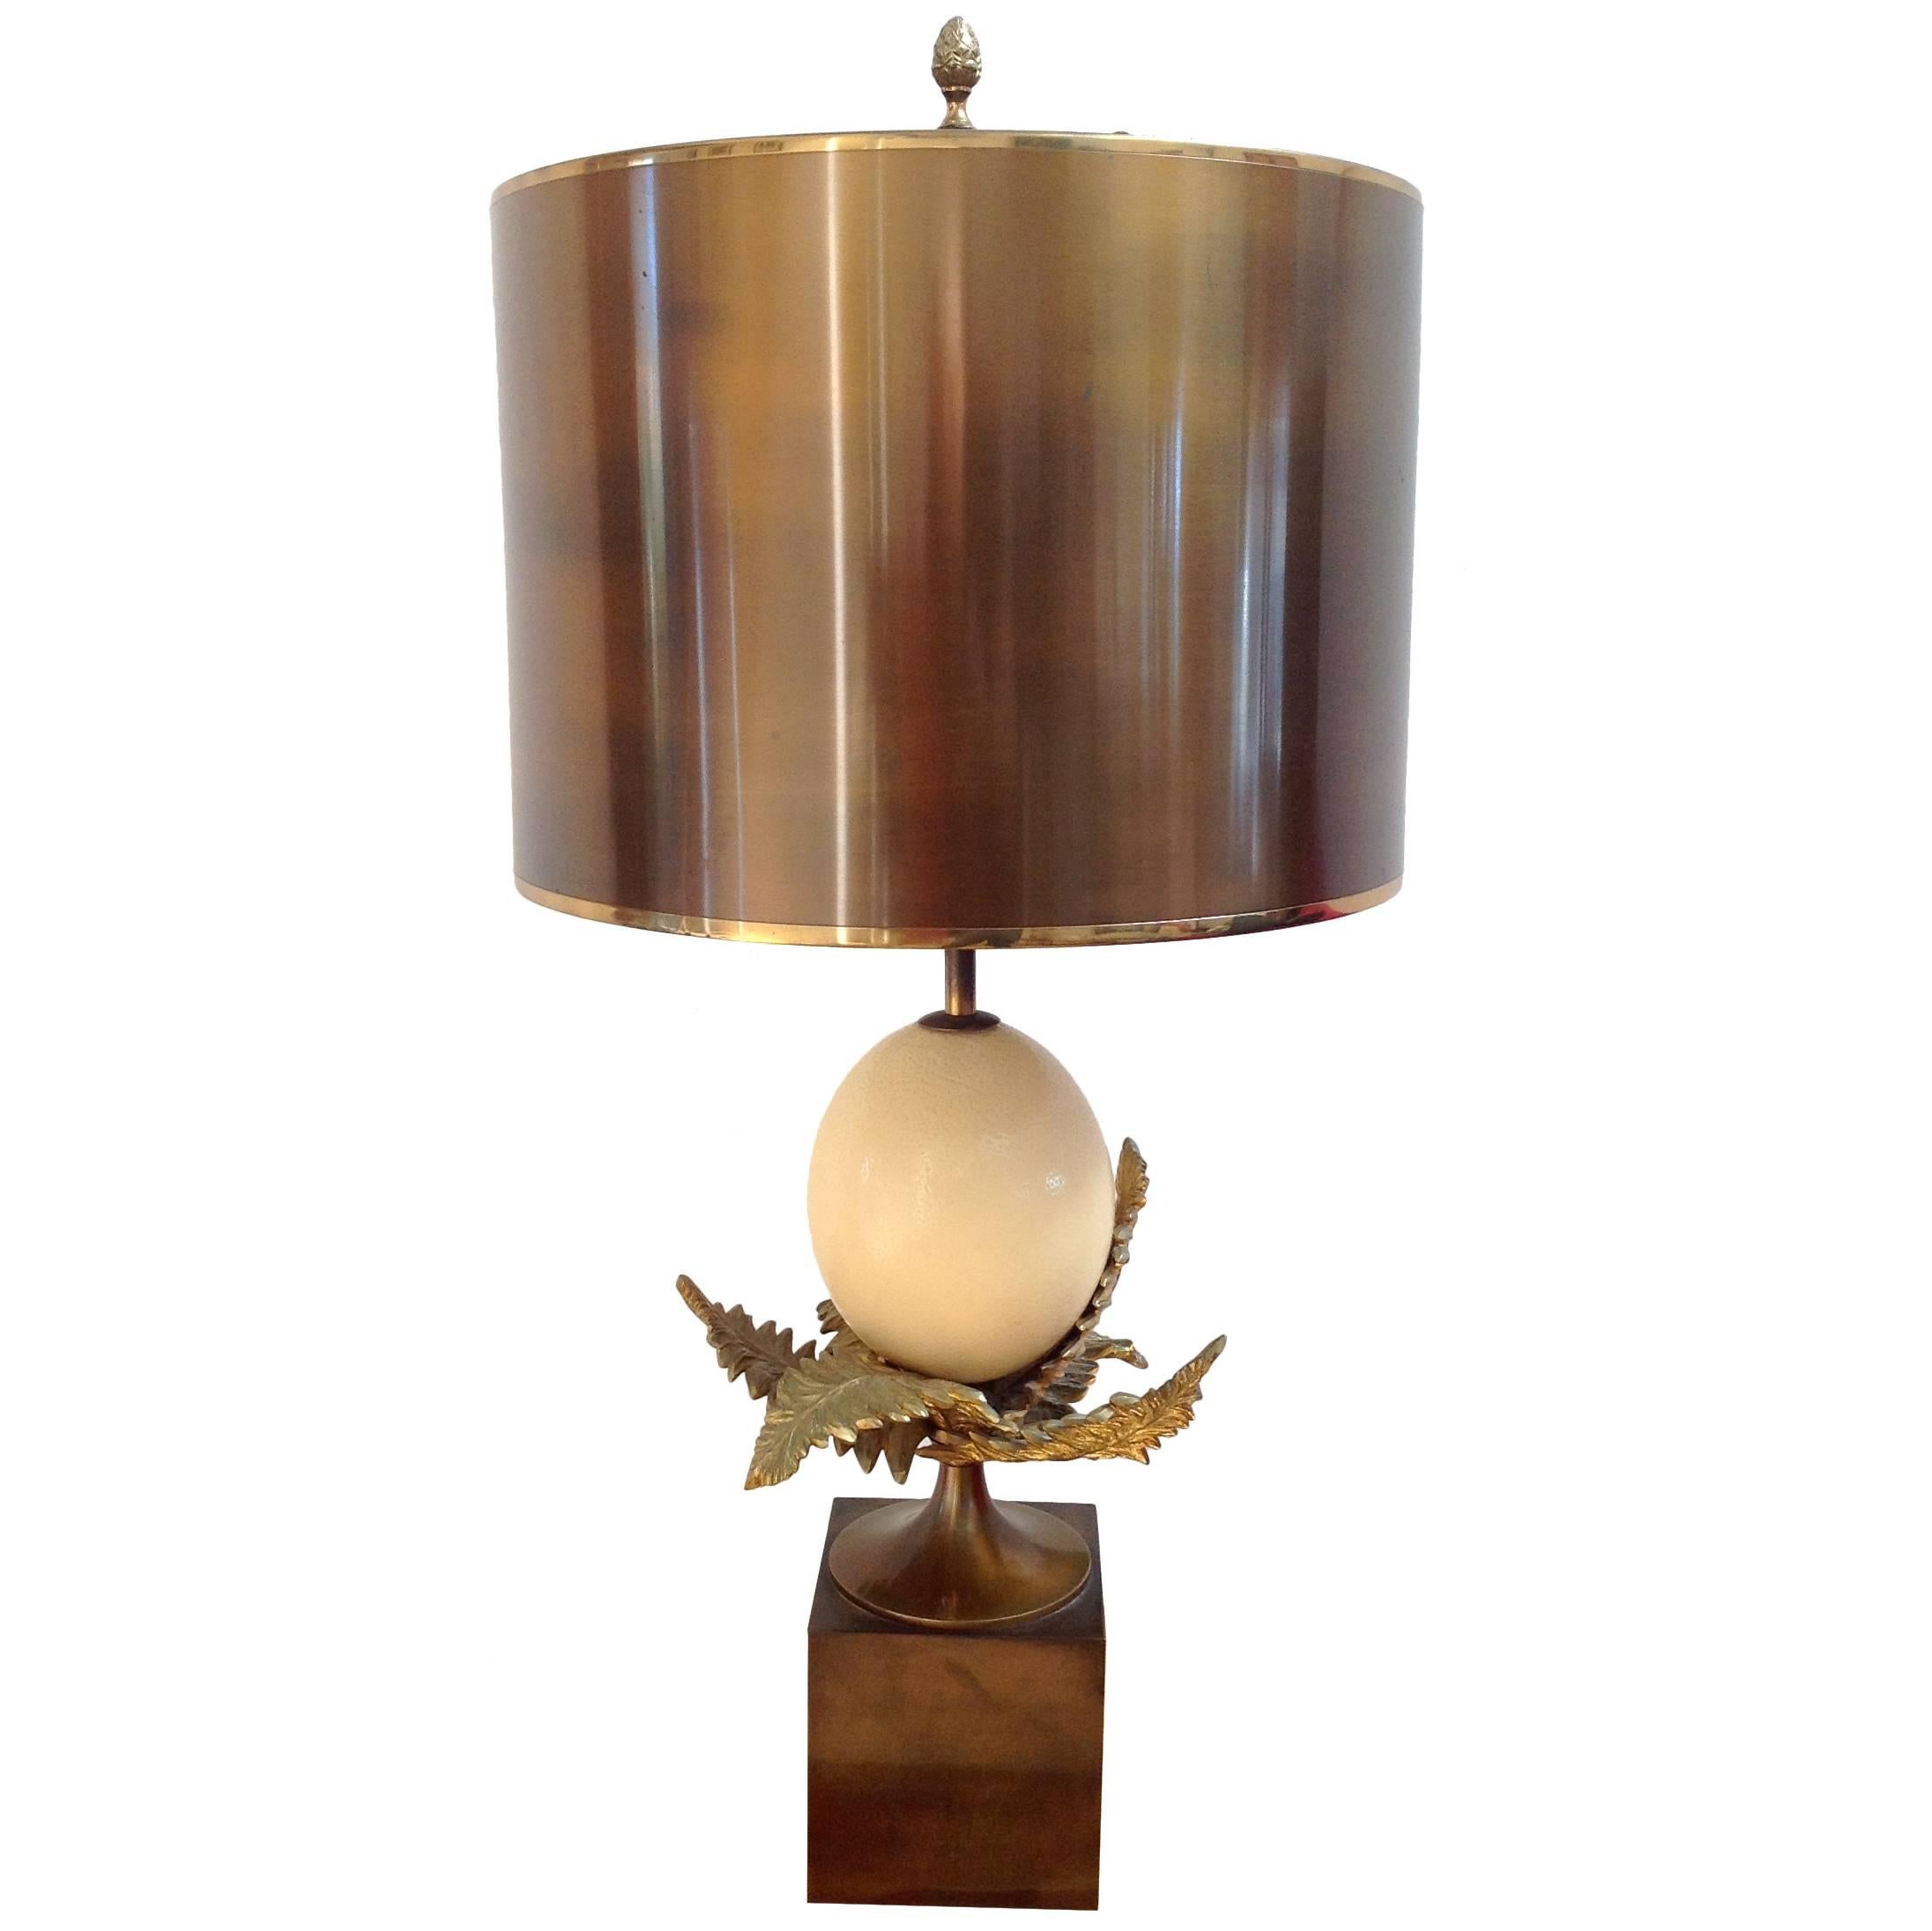 Rare Maison Charles "Fougere Oeuf" Lamp